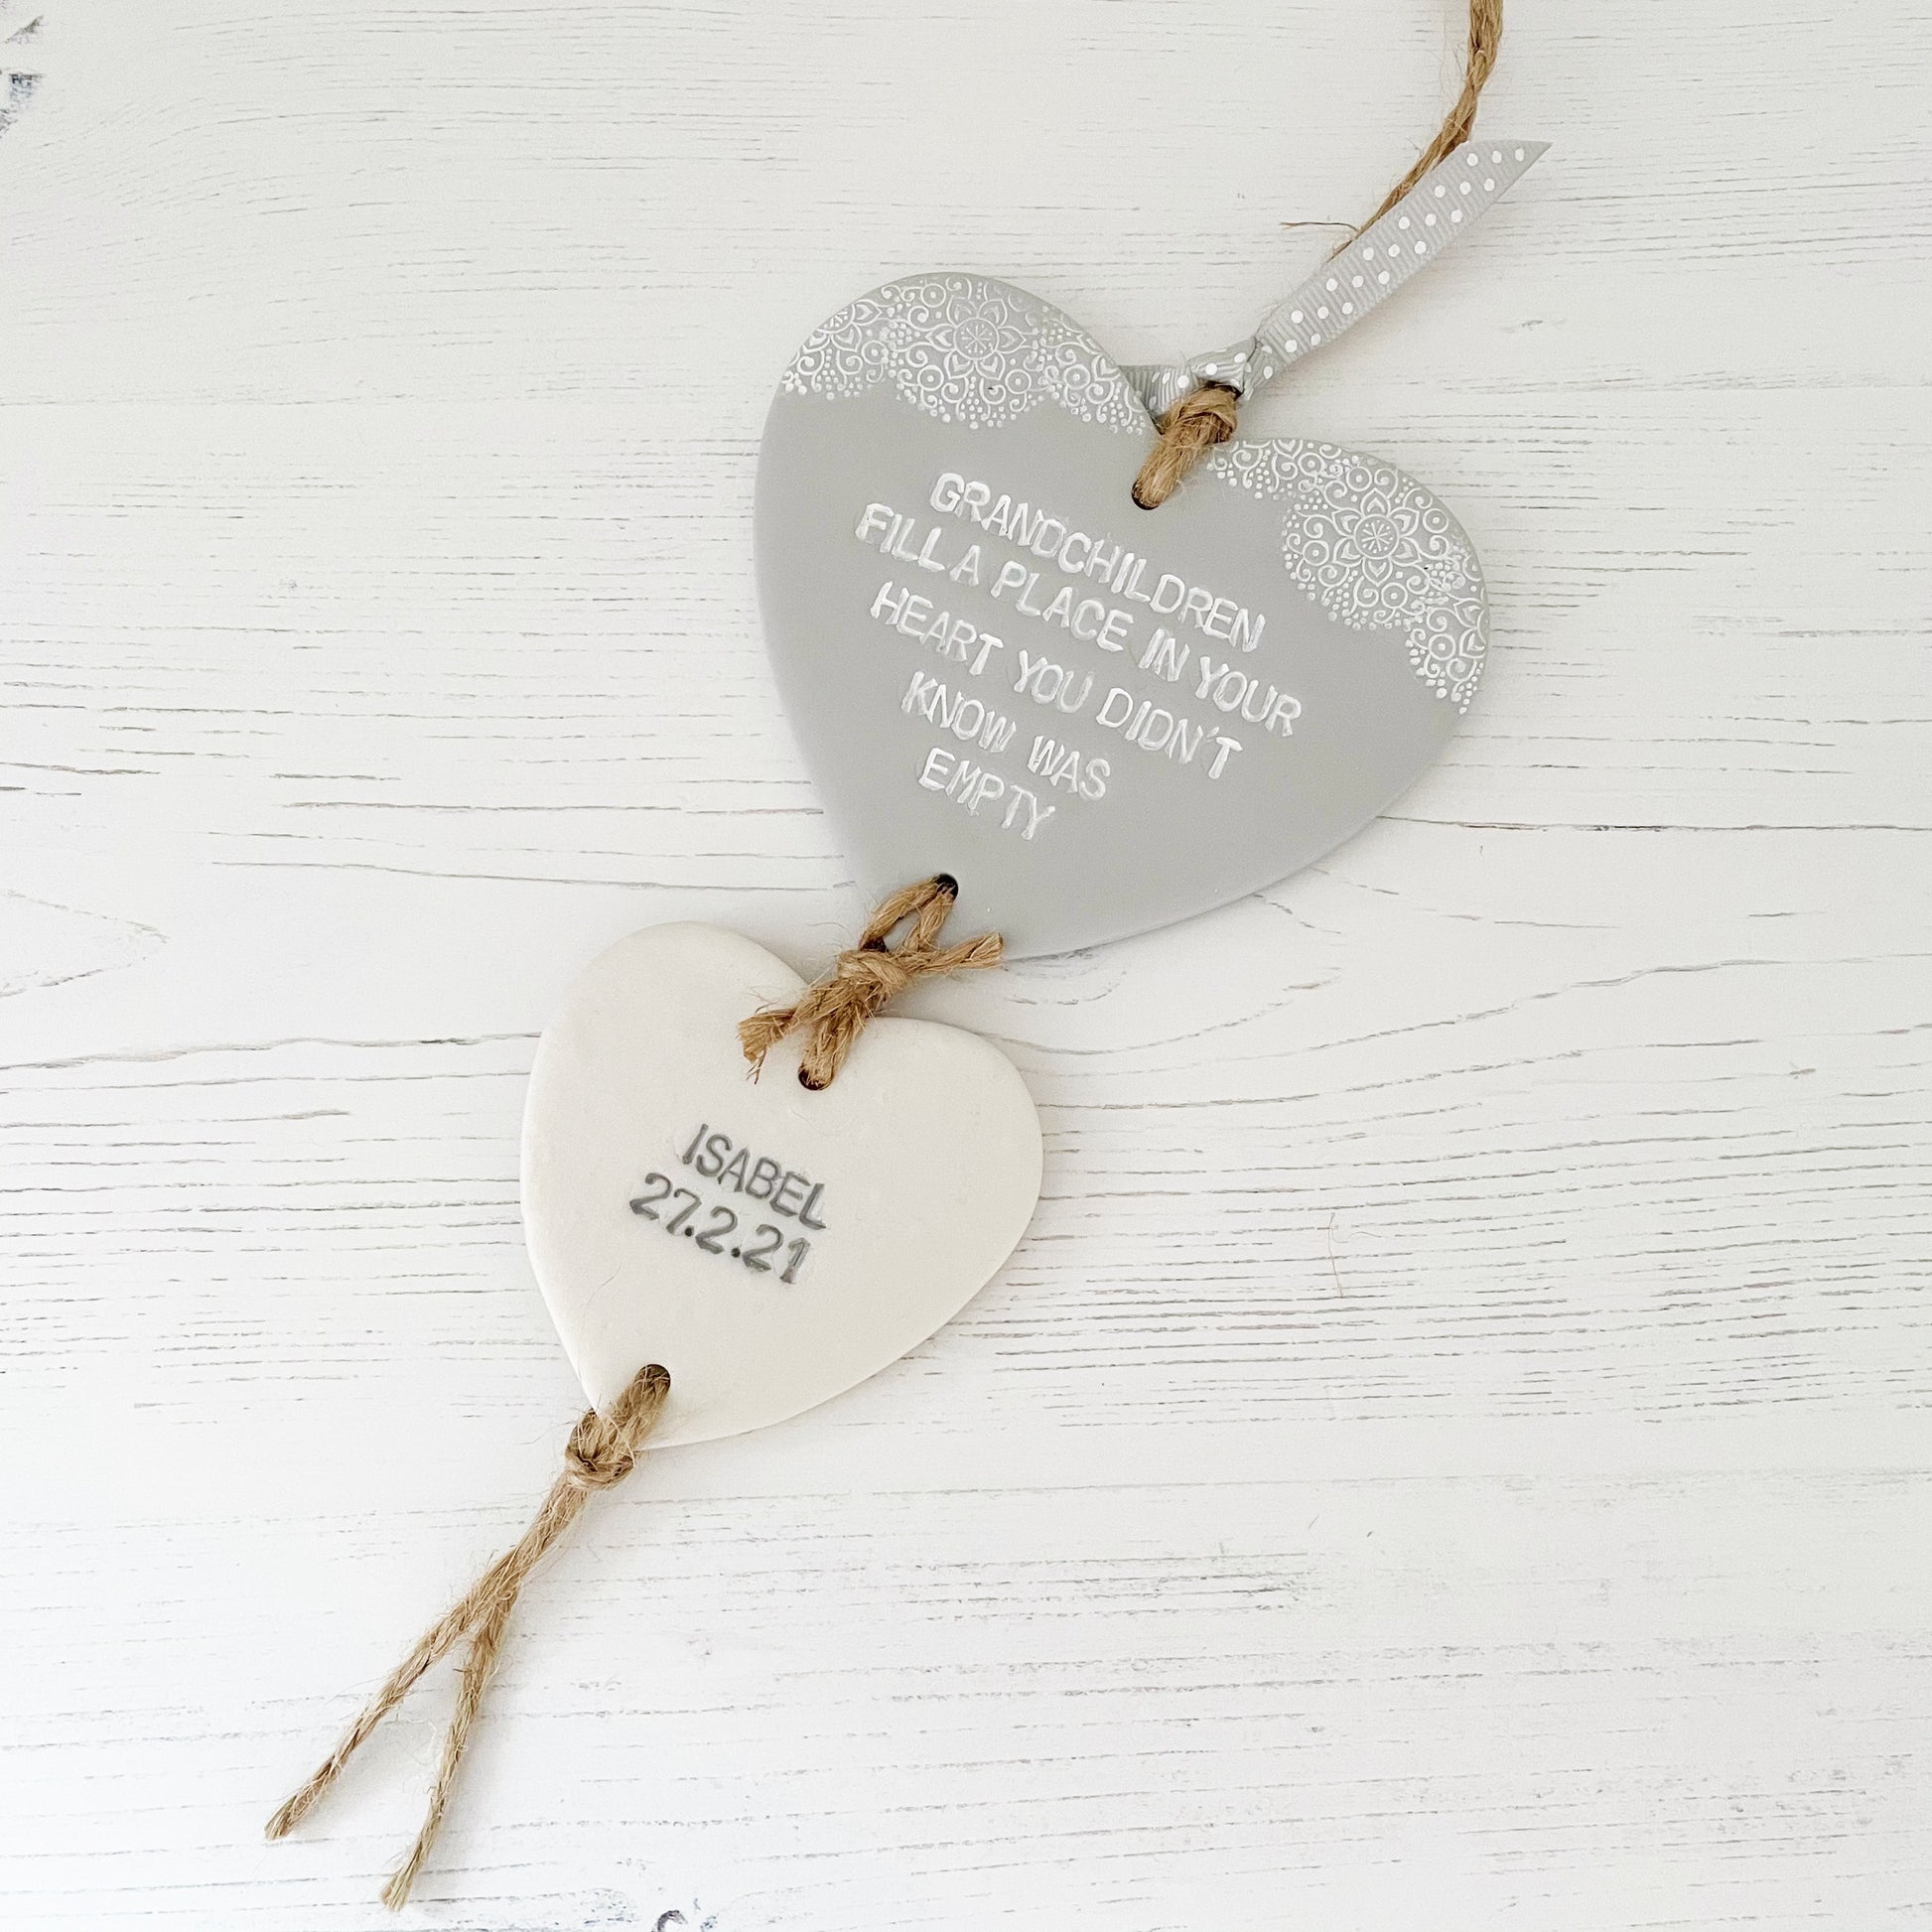 Grandparent keepsake with a large grey polymer clay heart with a quote “Grandchildren fill a place in your heart you didn’t know was empty” and a small pearlised white heart hanging below with a name and date of birth